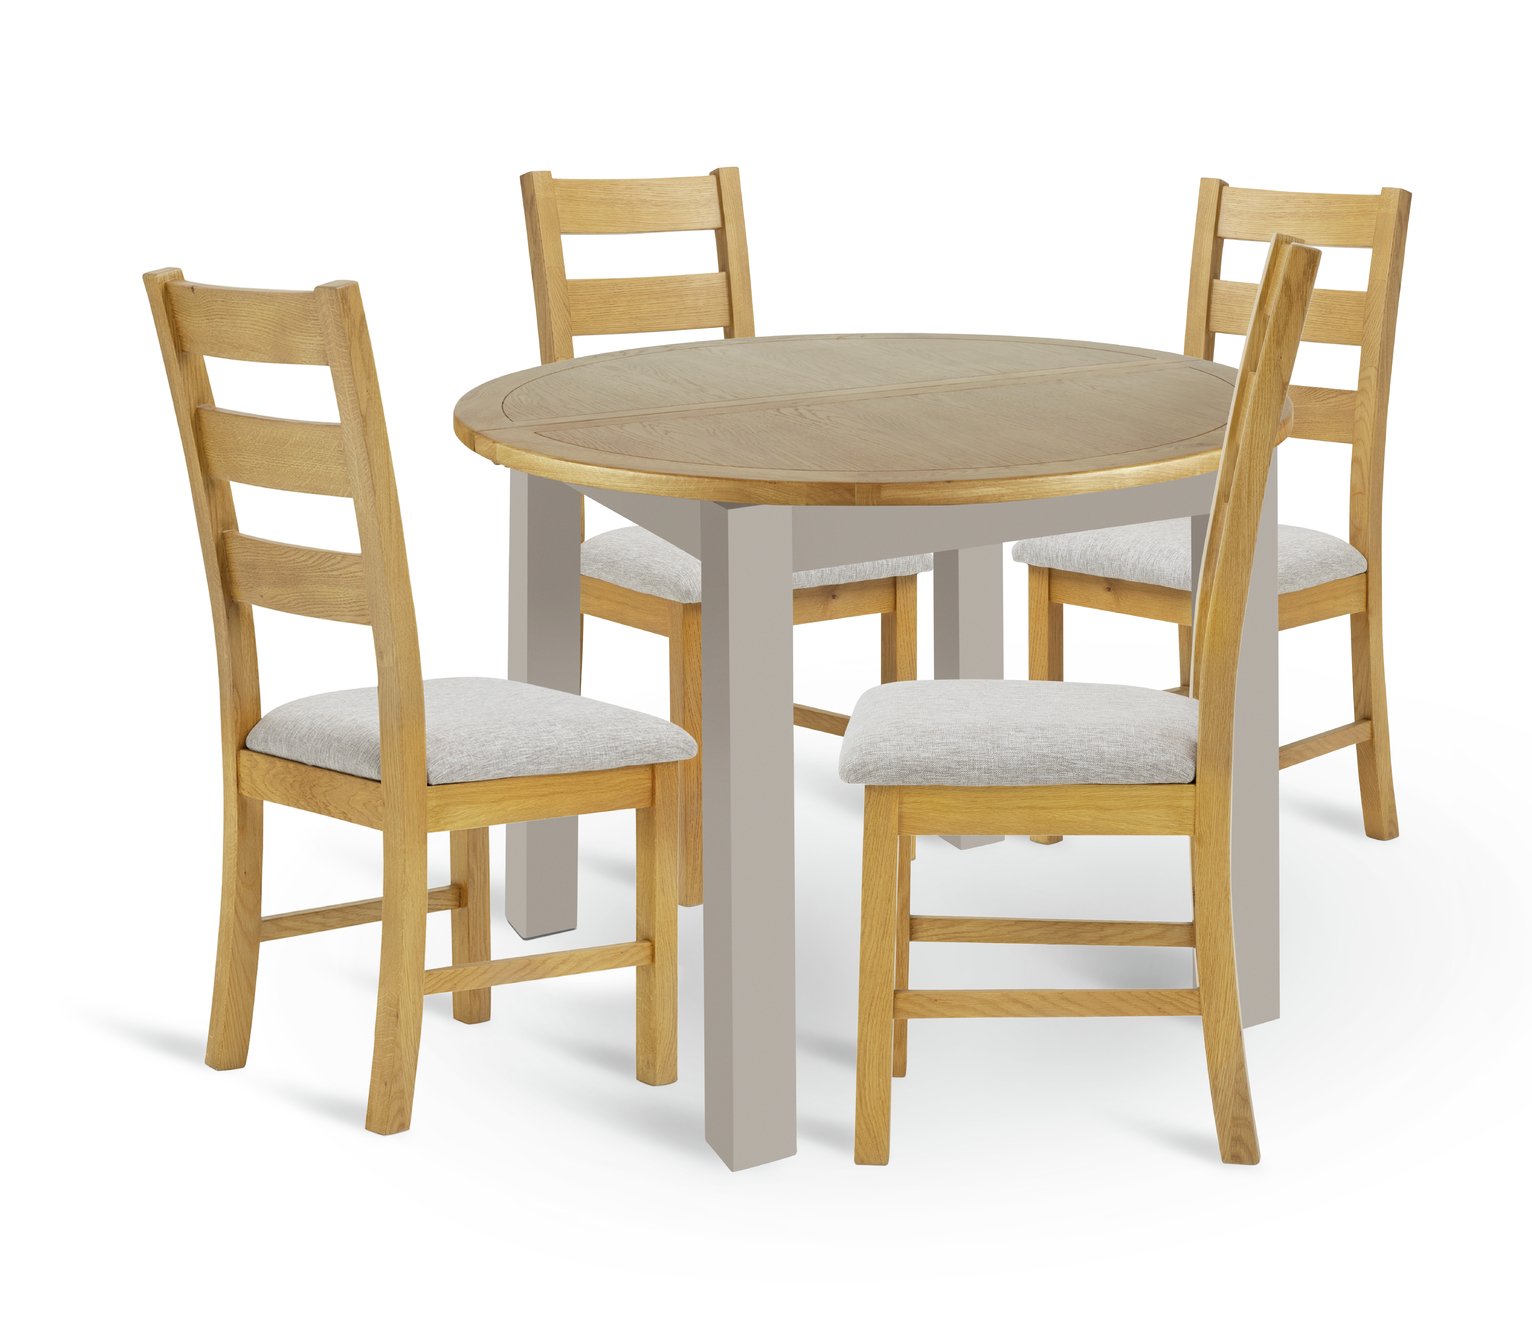 Argos Home Ashwell Oak and Grey Extending Table & 4 Chairs